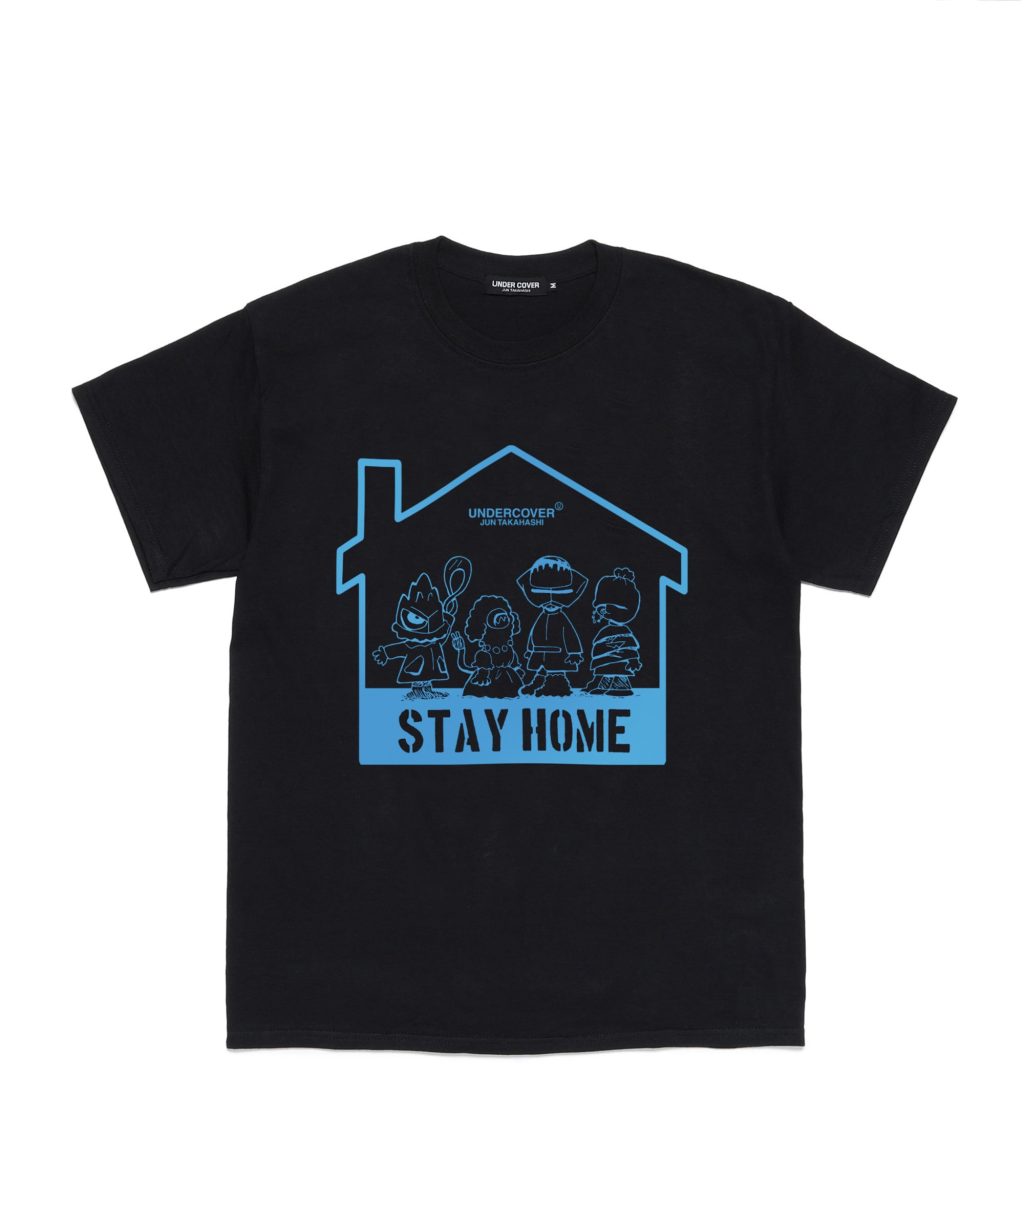 undercover-stay-home-t-shirt-release-20200417